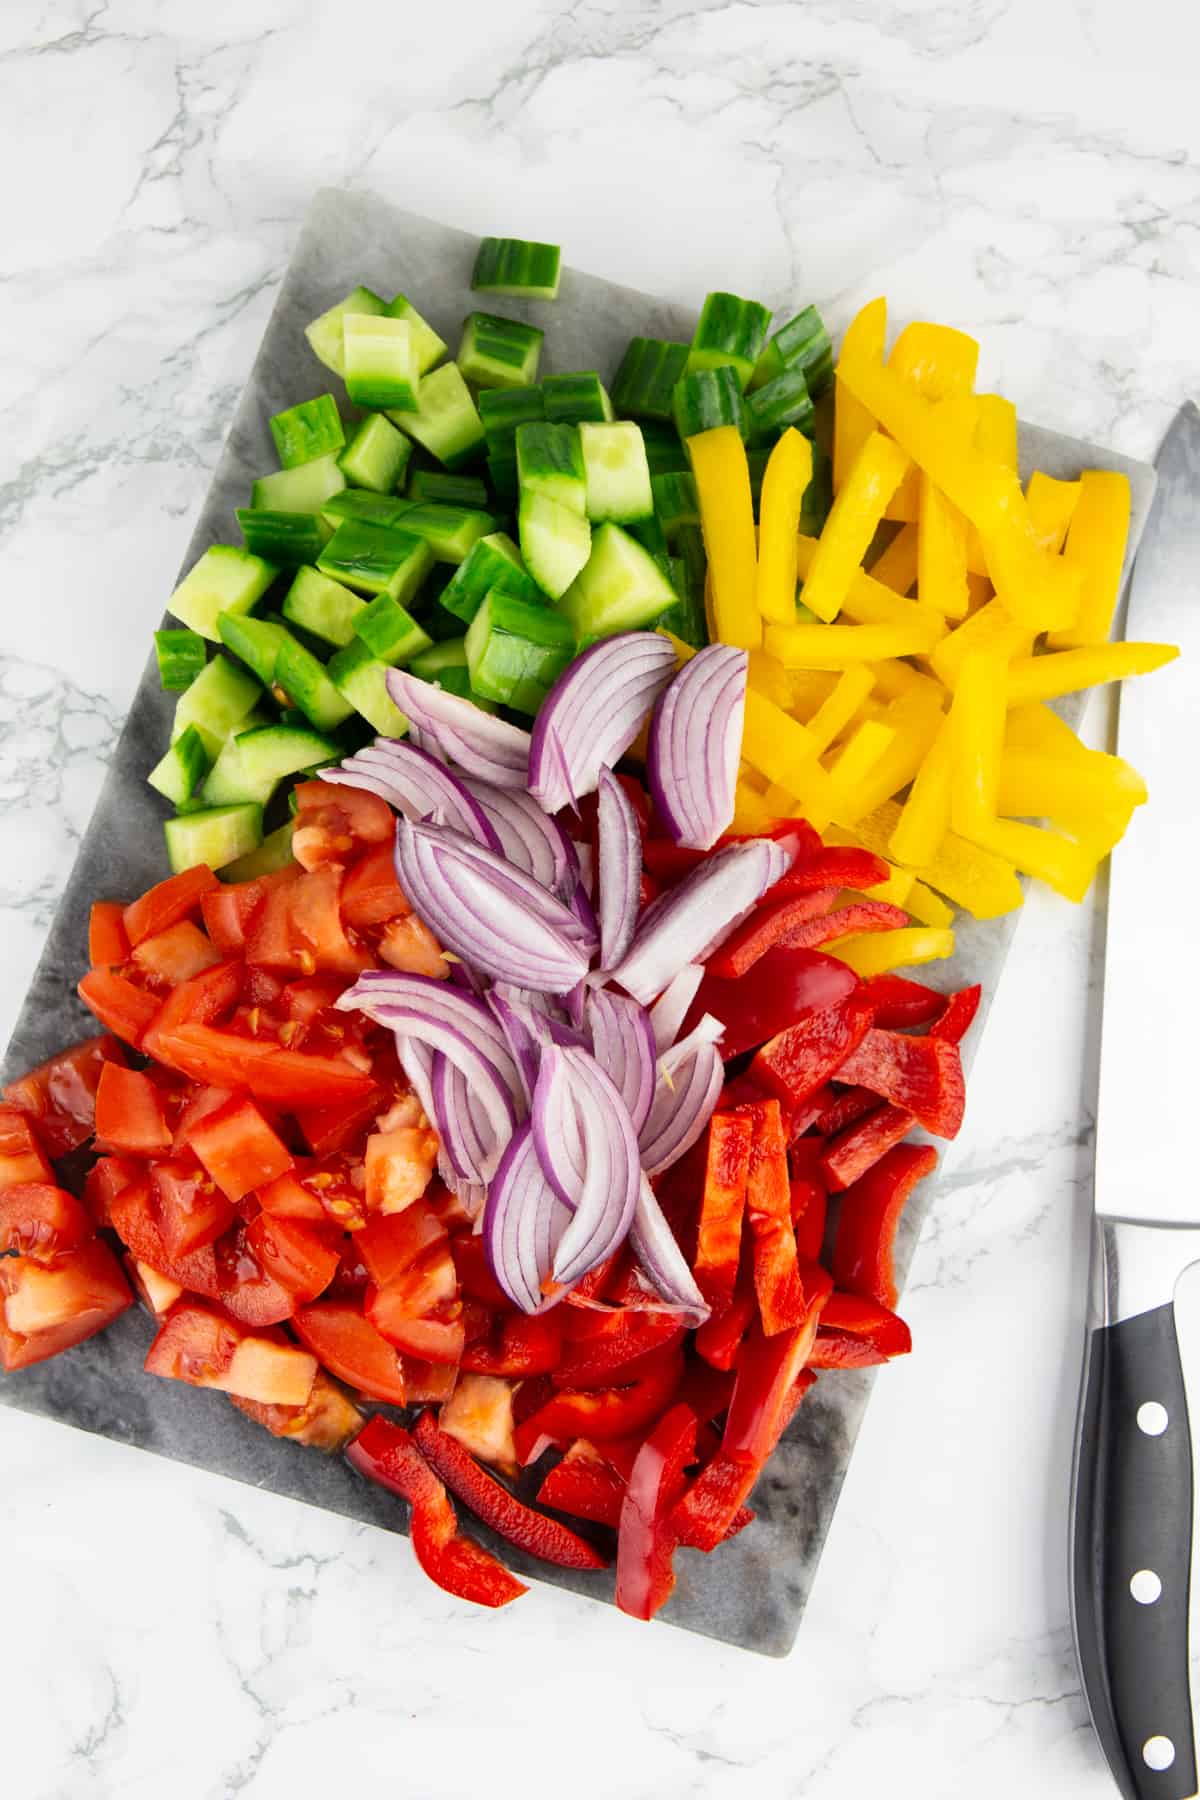 cut up vegetables on a marble chopping board with a knife on the side